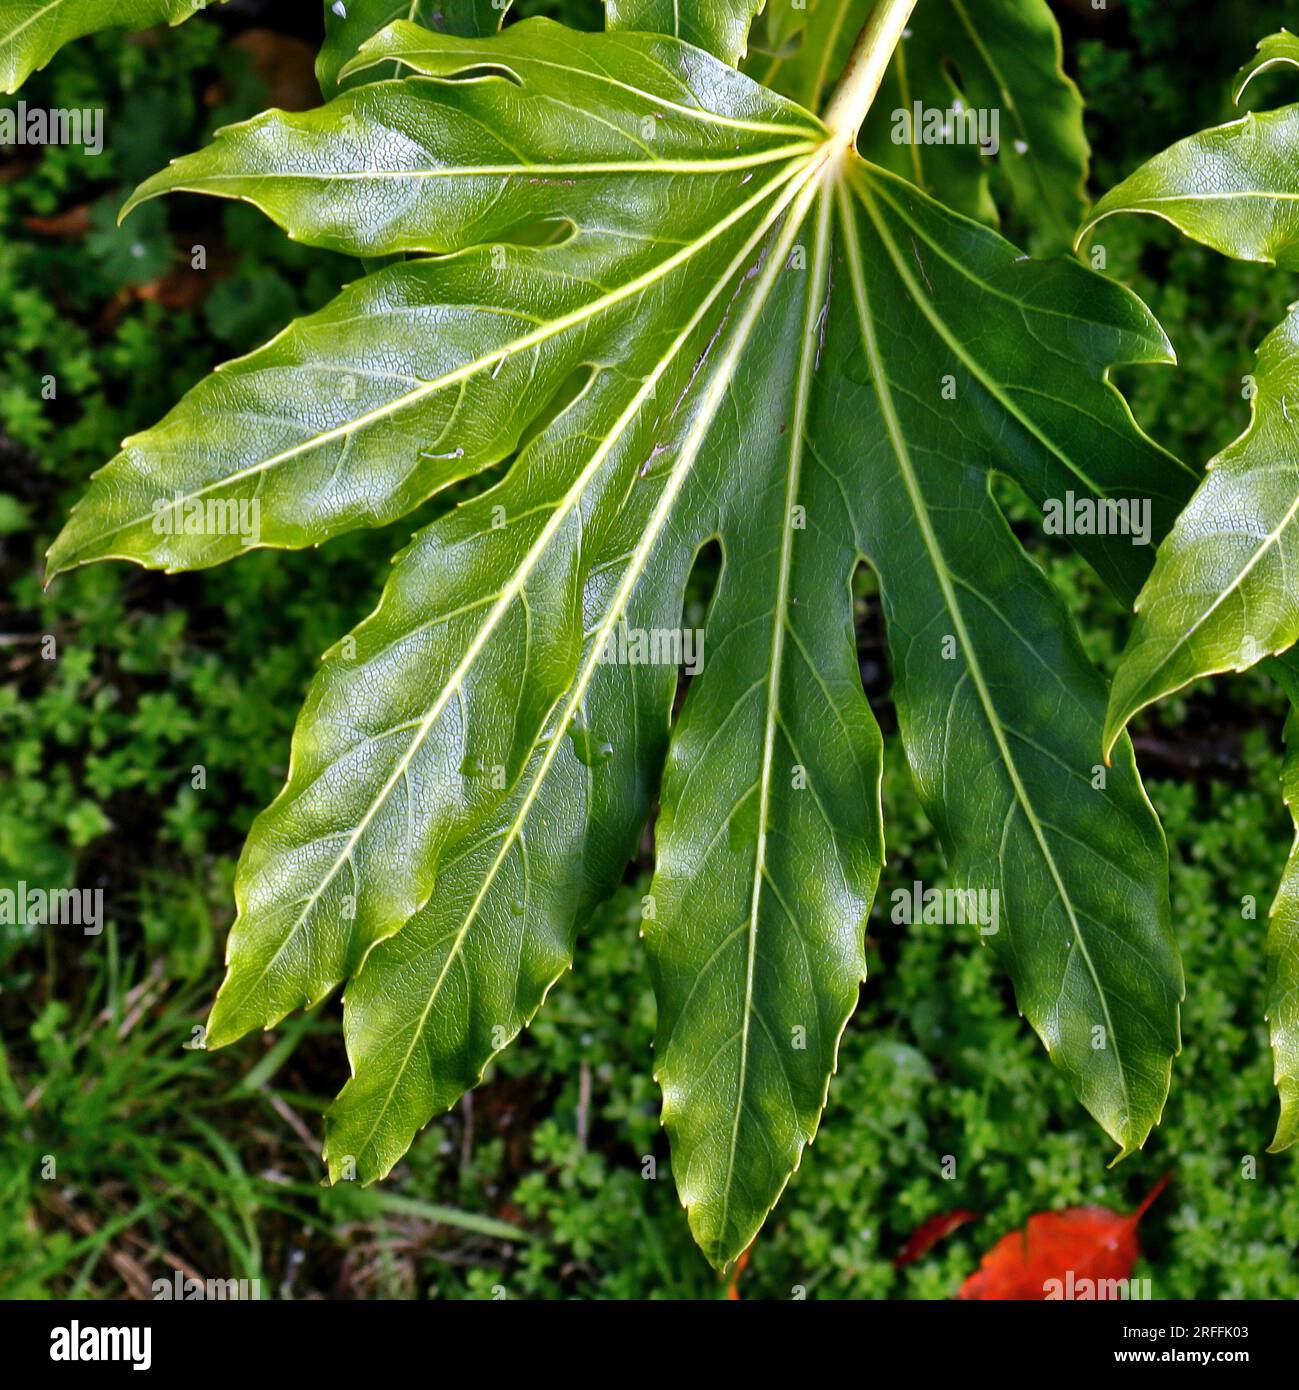 Glossy, green, Fatsia Japonica leaf. A multi-fingered leaf in bold colours and set against green ground foliage. Light background blur. Stock Photo